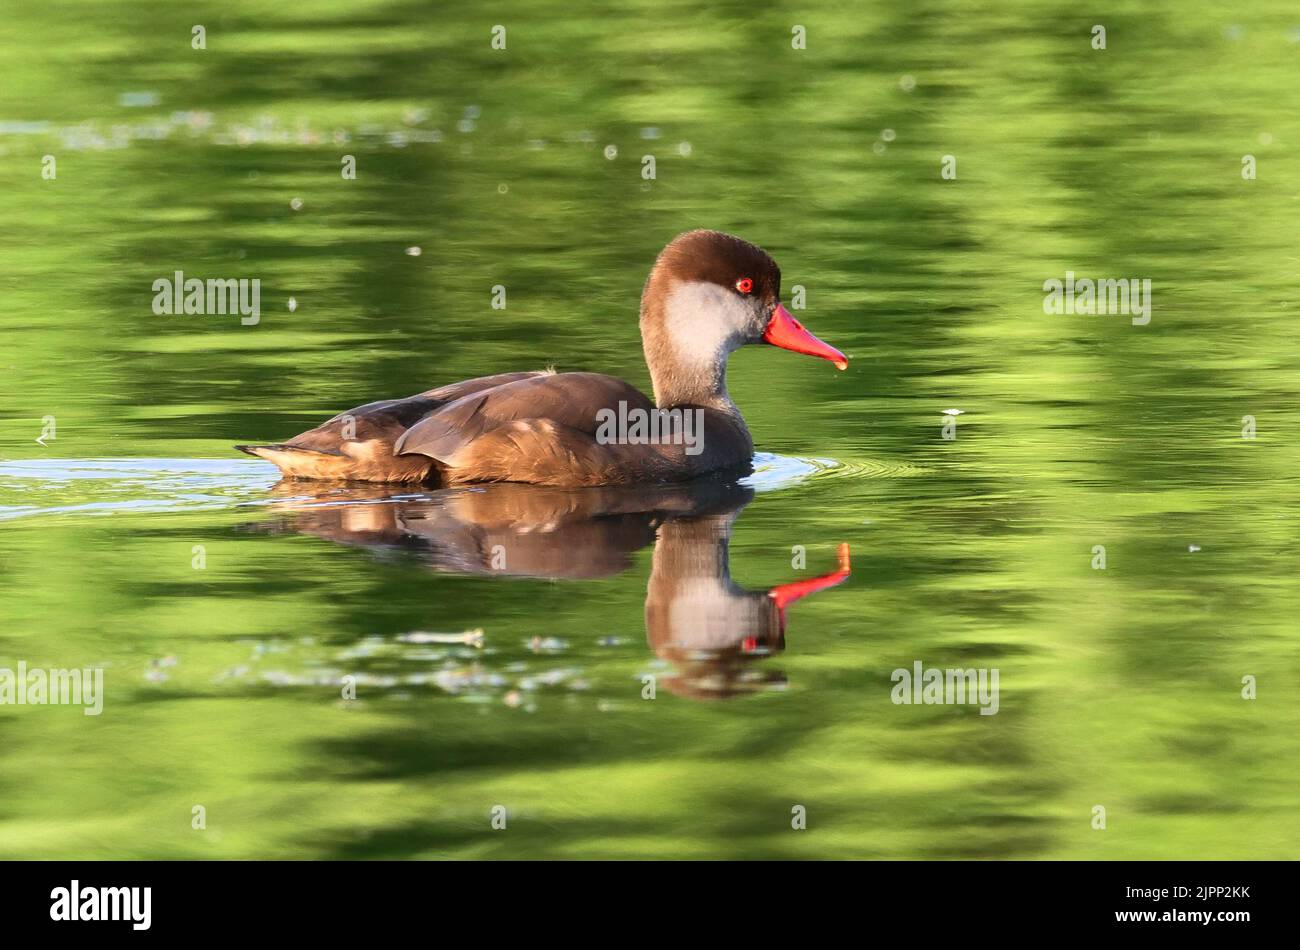 07 August 2022, Schleswig-Holstein, Plön: 07.08.2022, Ploen. A Pochard Duckling (Netta rufina) in slack dress is swimming on the big Ploen Lake. The diving duck is looking for food and still has a drop of water hanging from its beak from the last dive. Photo: Wolfram Steinberg/dpa Photo: Wolfram Steinberg/dpa Stock Photo